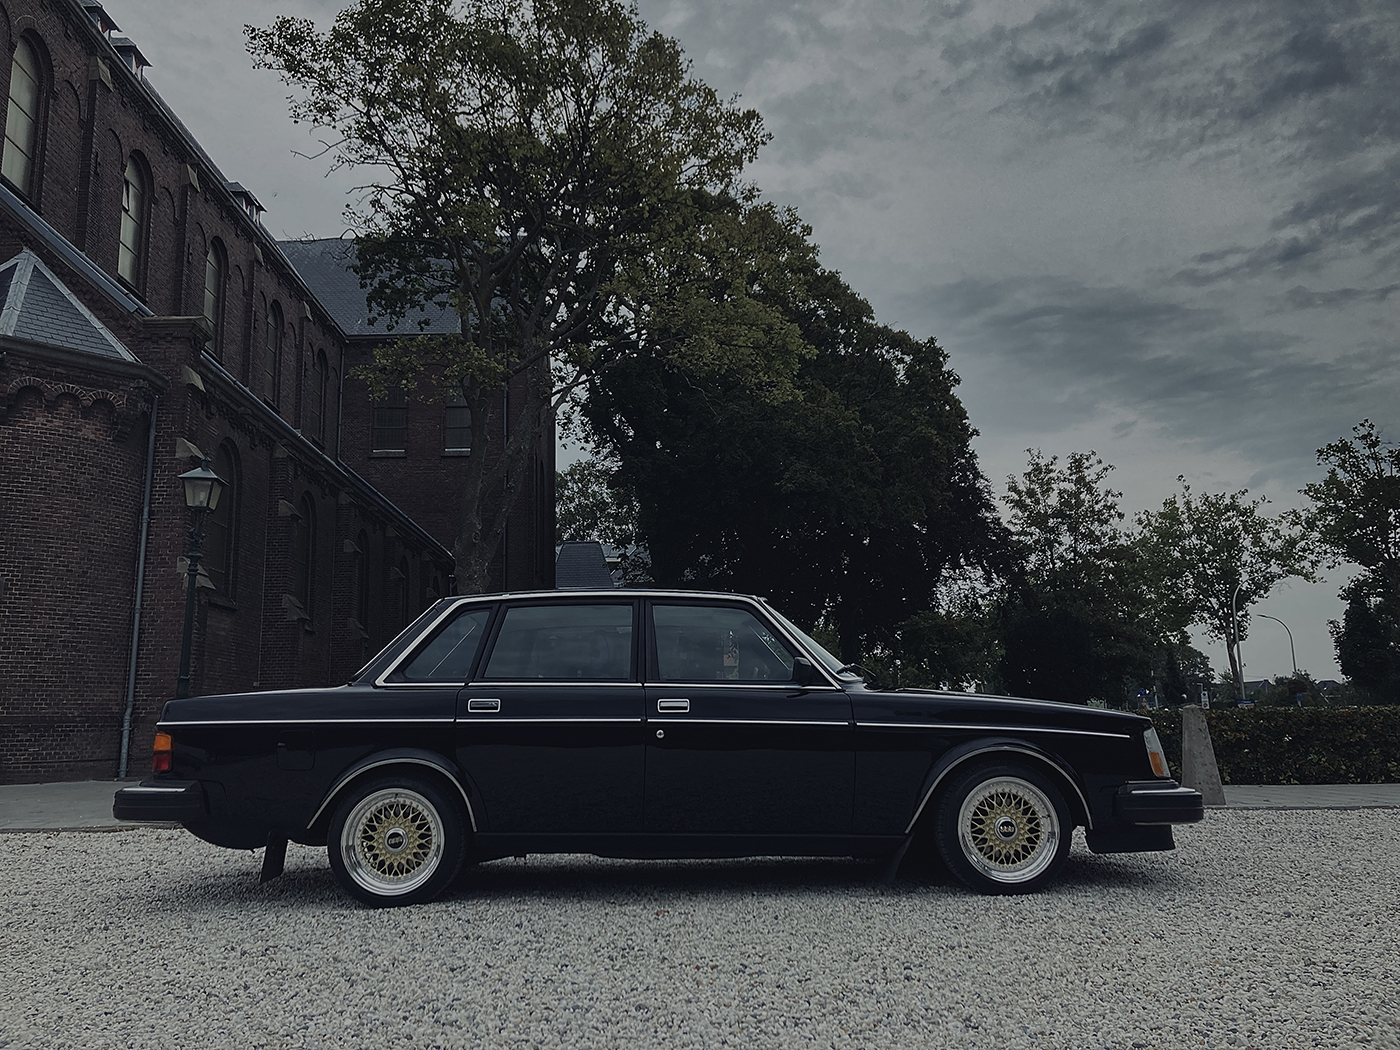 Volvo 244 / 240 sedan with gold BBS RS 112 wheels. Front 7.5J Rear 8.5J wide